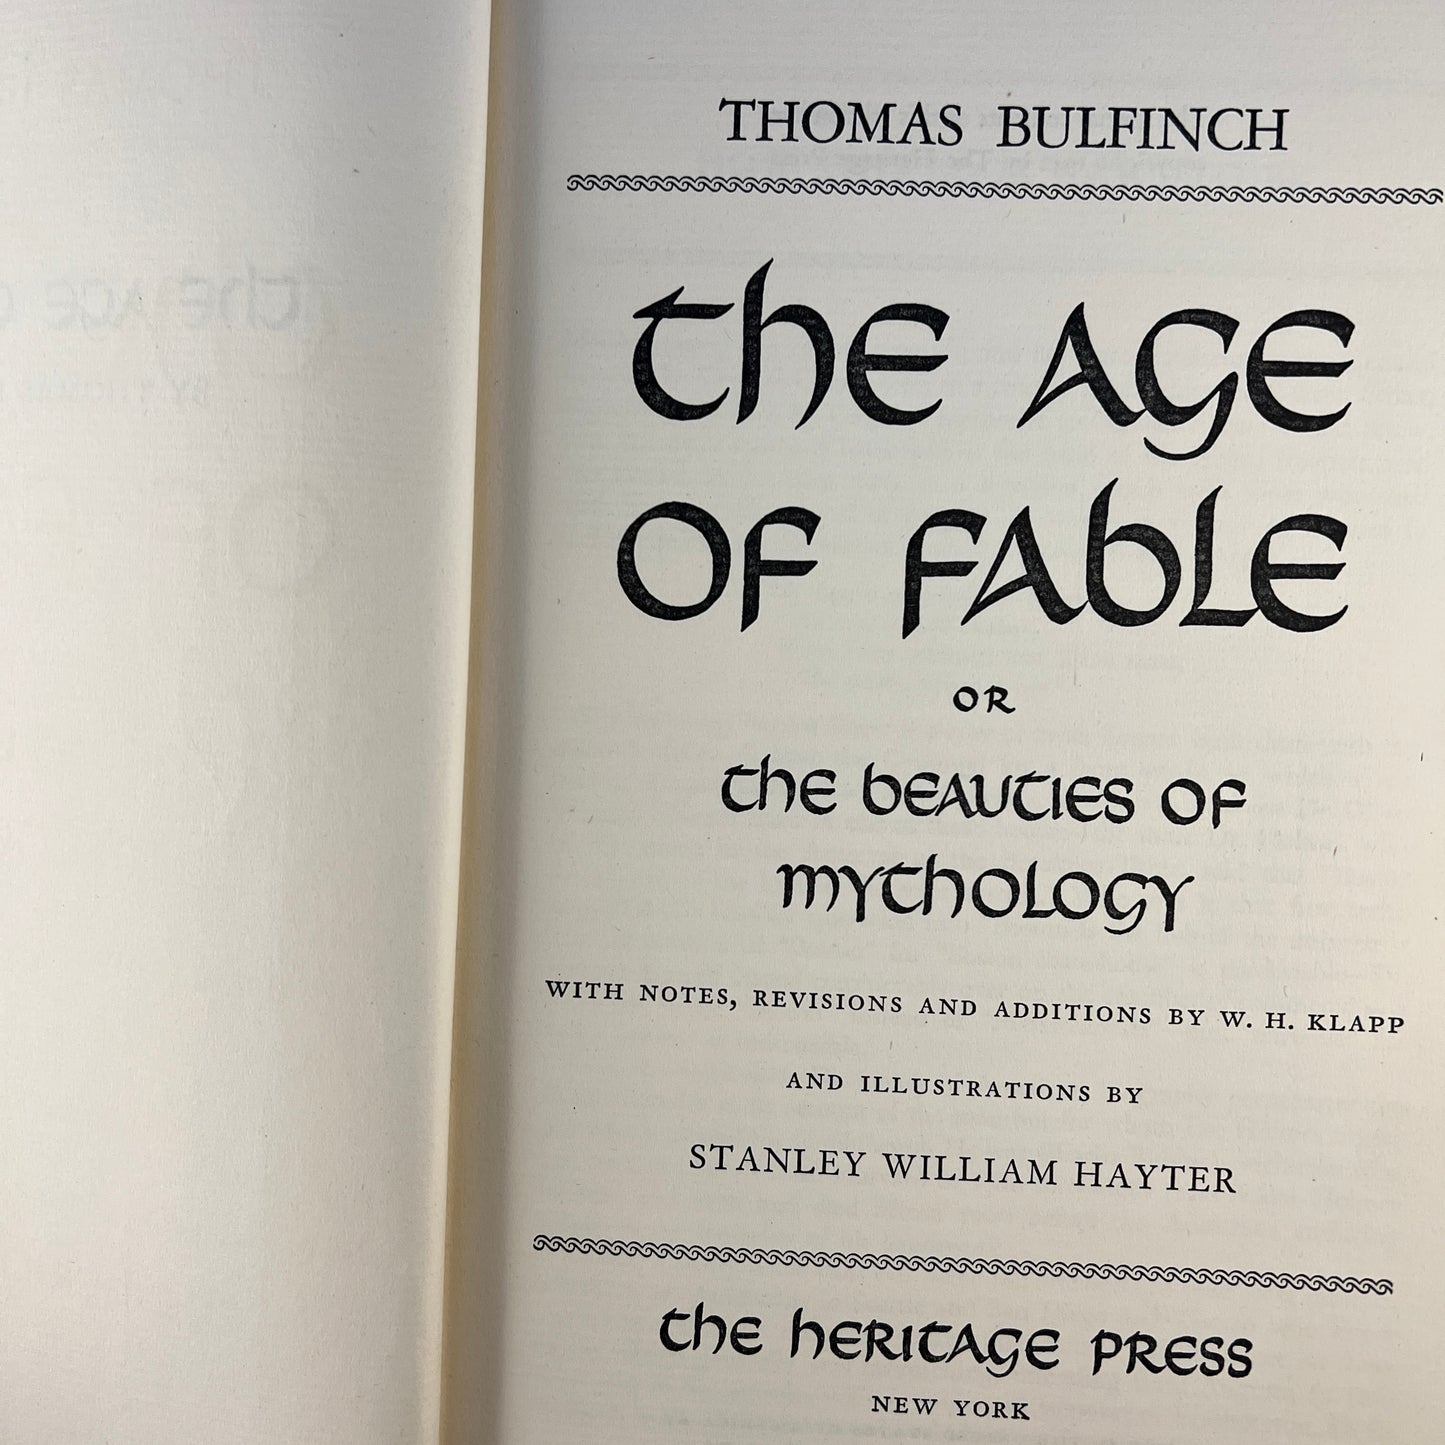 The Age of Fable or the Beauties of Mythology